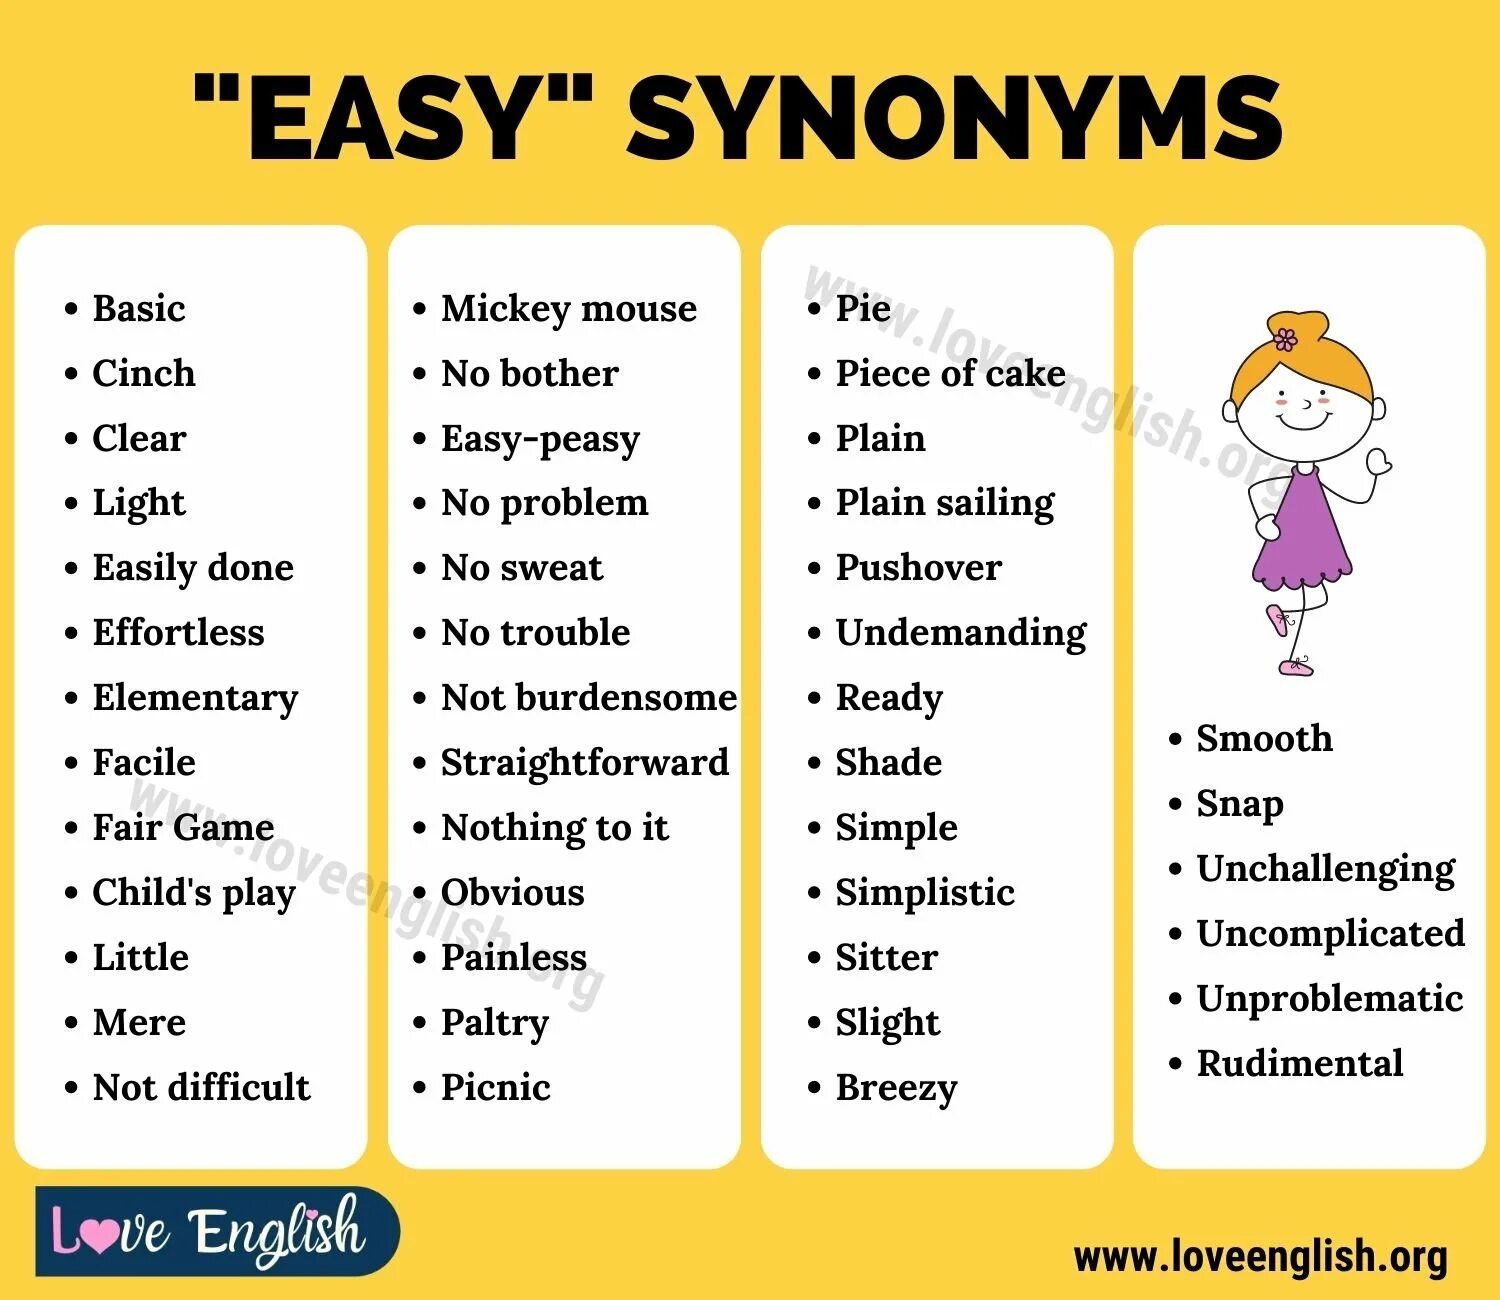 Interest synonyms. Easy synonyms. Английские синонимы. Synonyms for easy. Easy синонимы.